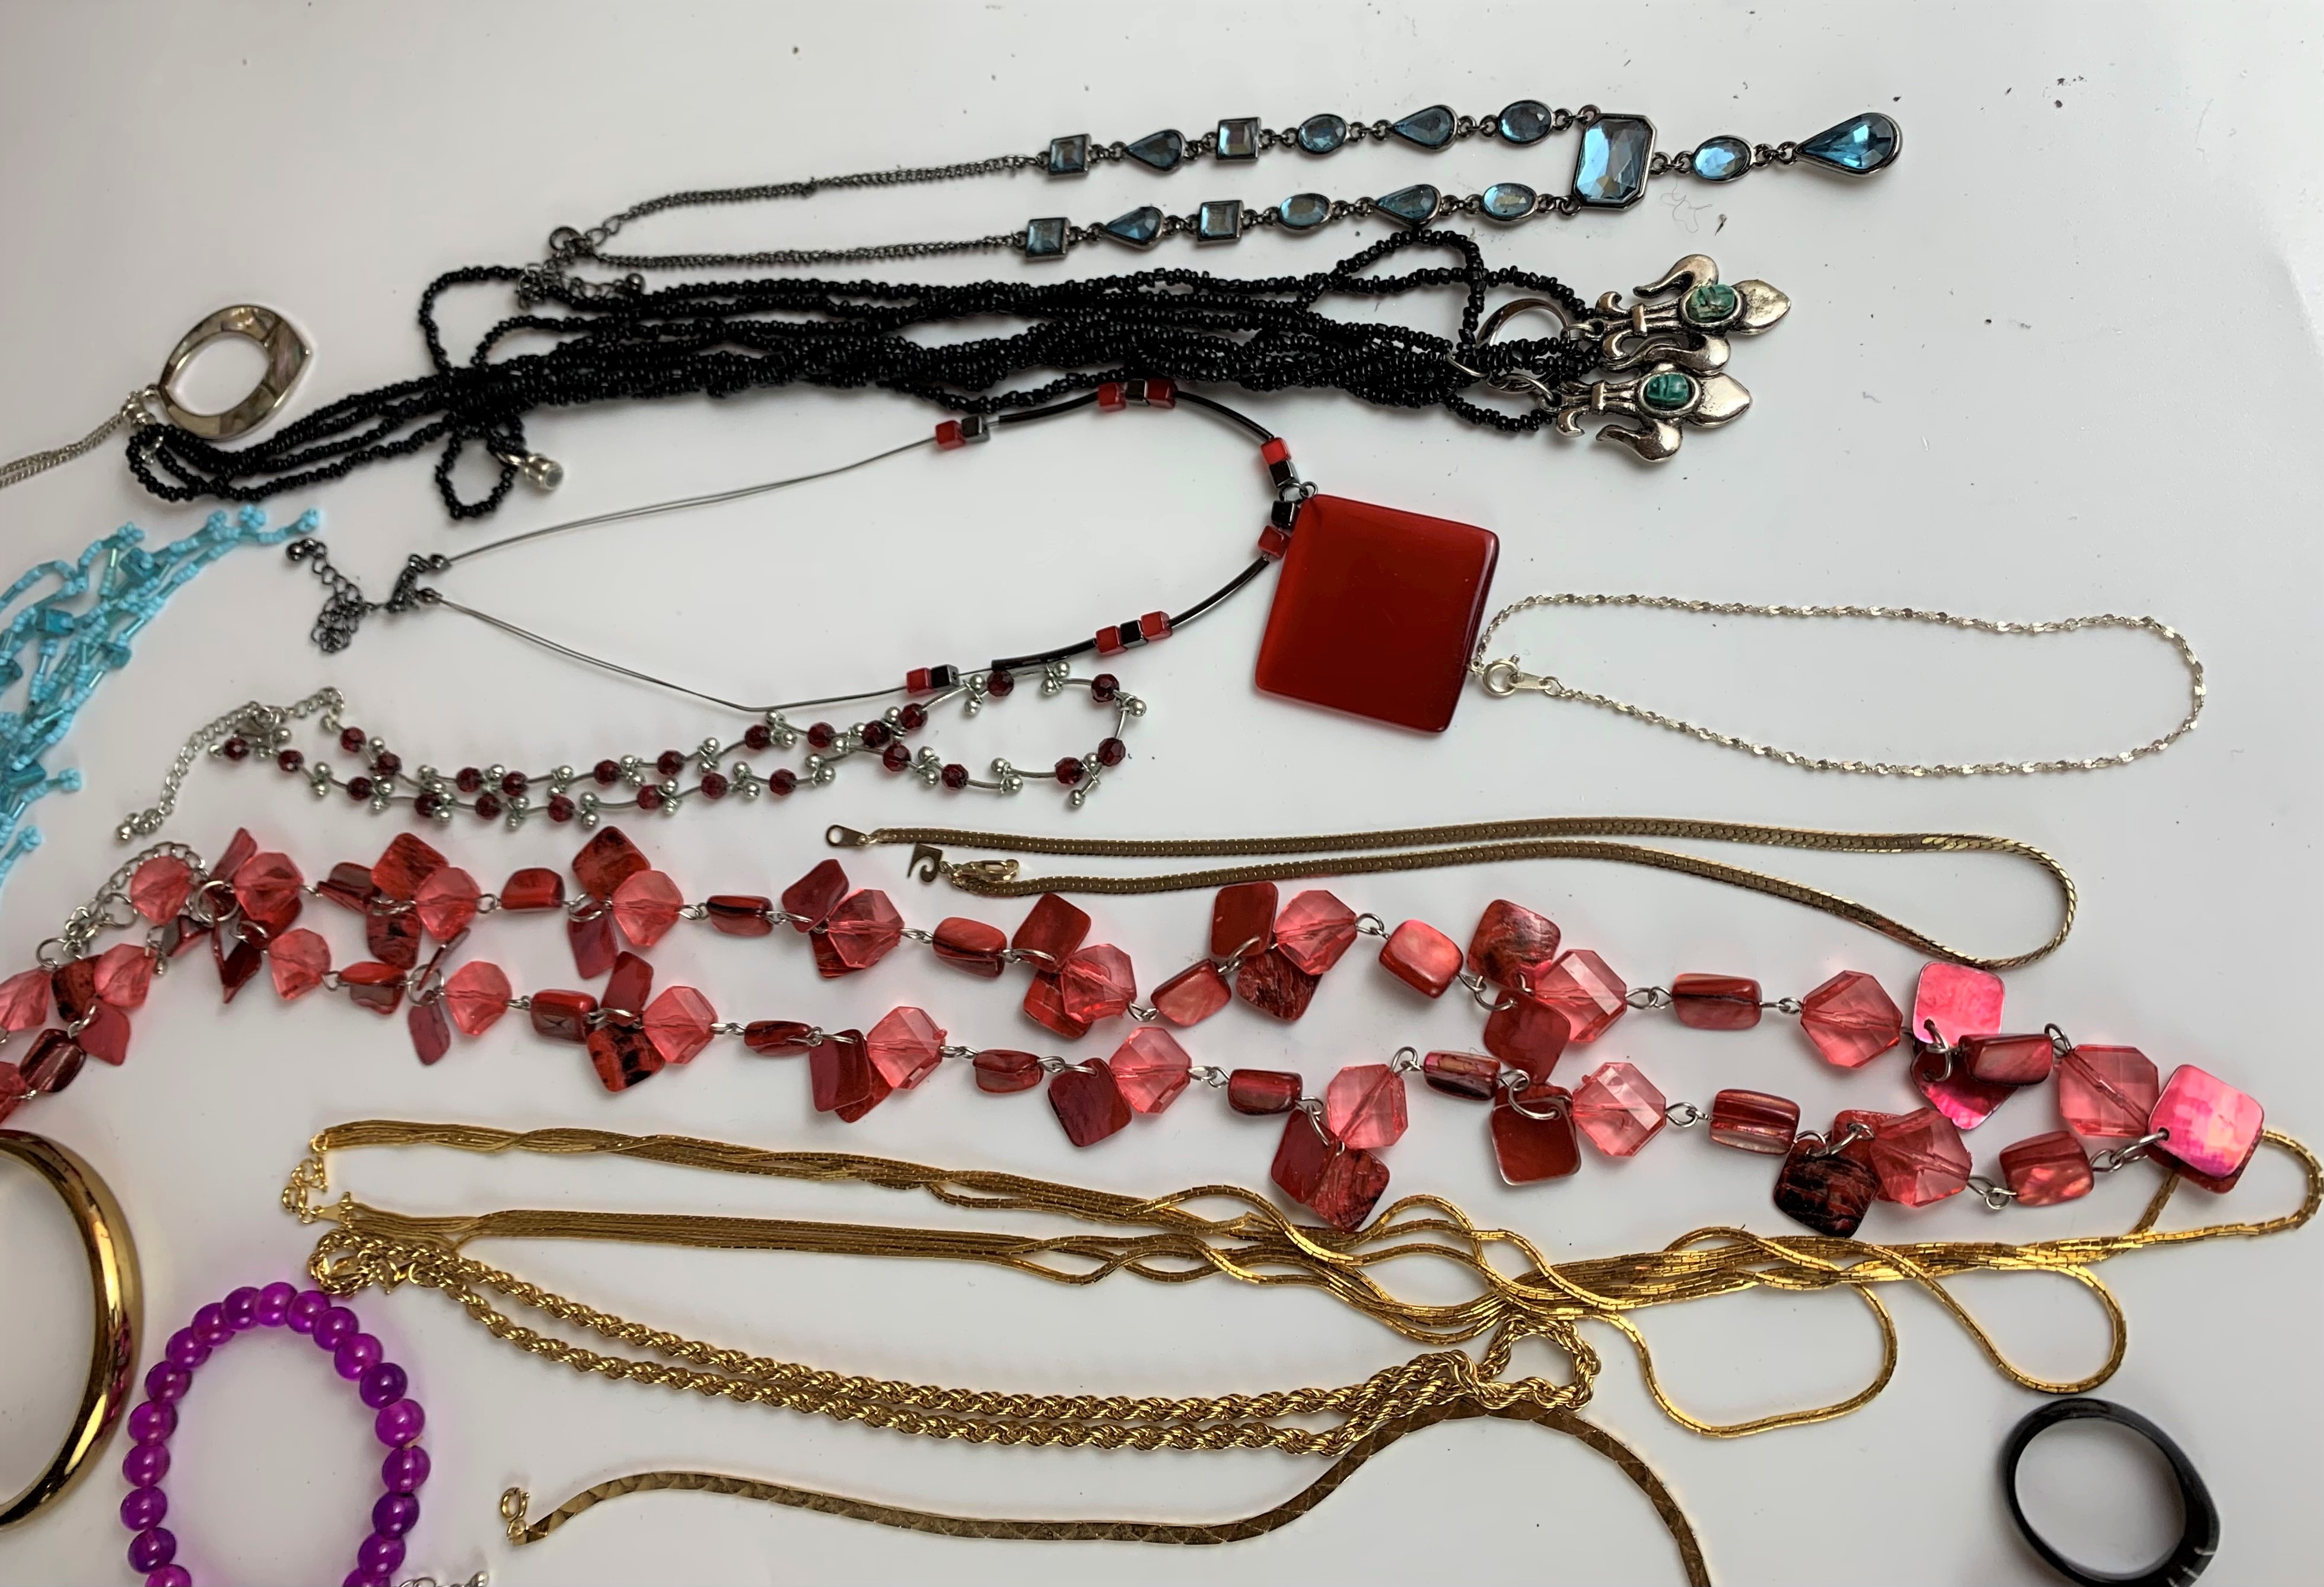 Dress jewellery including necklaces, beads, bracelets, rings etc. - Image 11 of 14